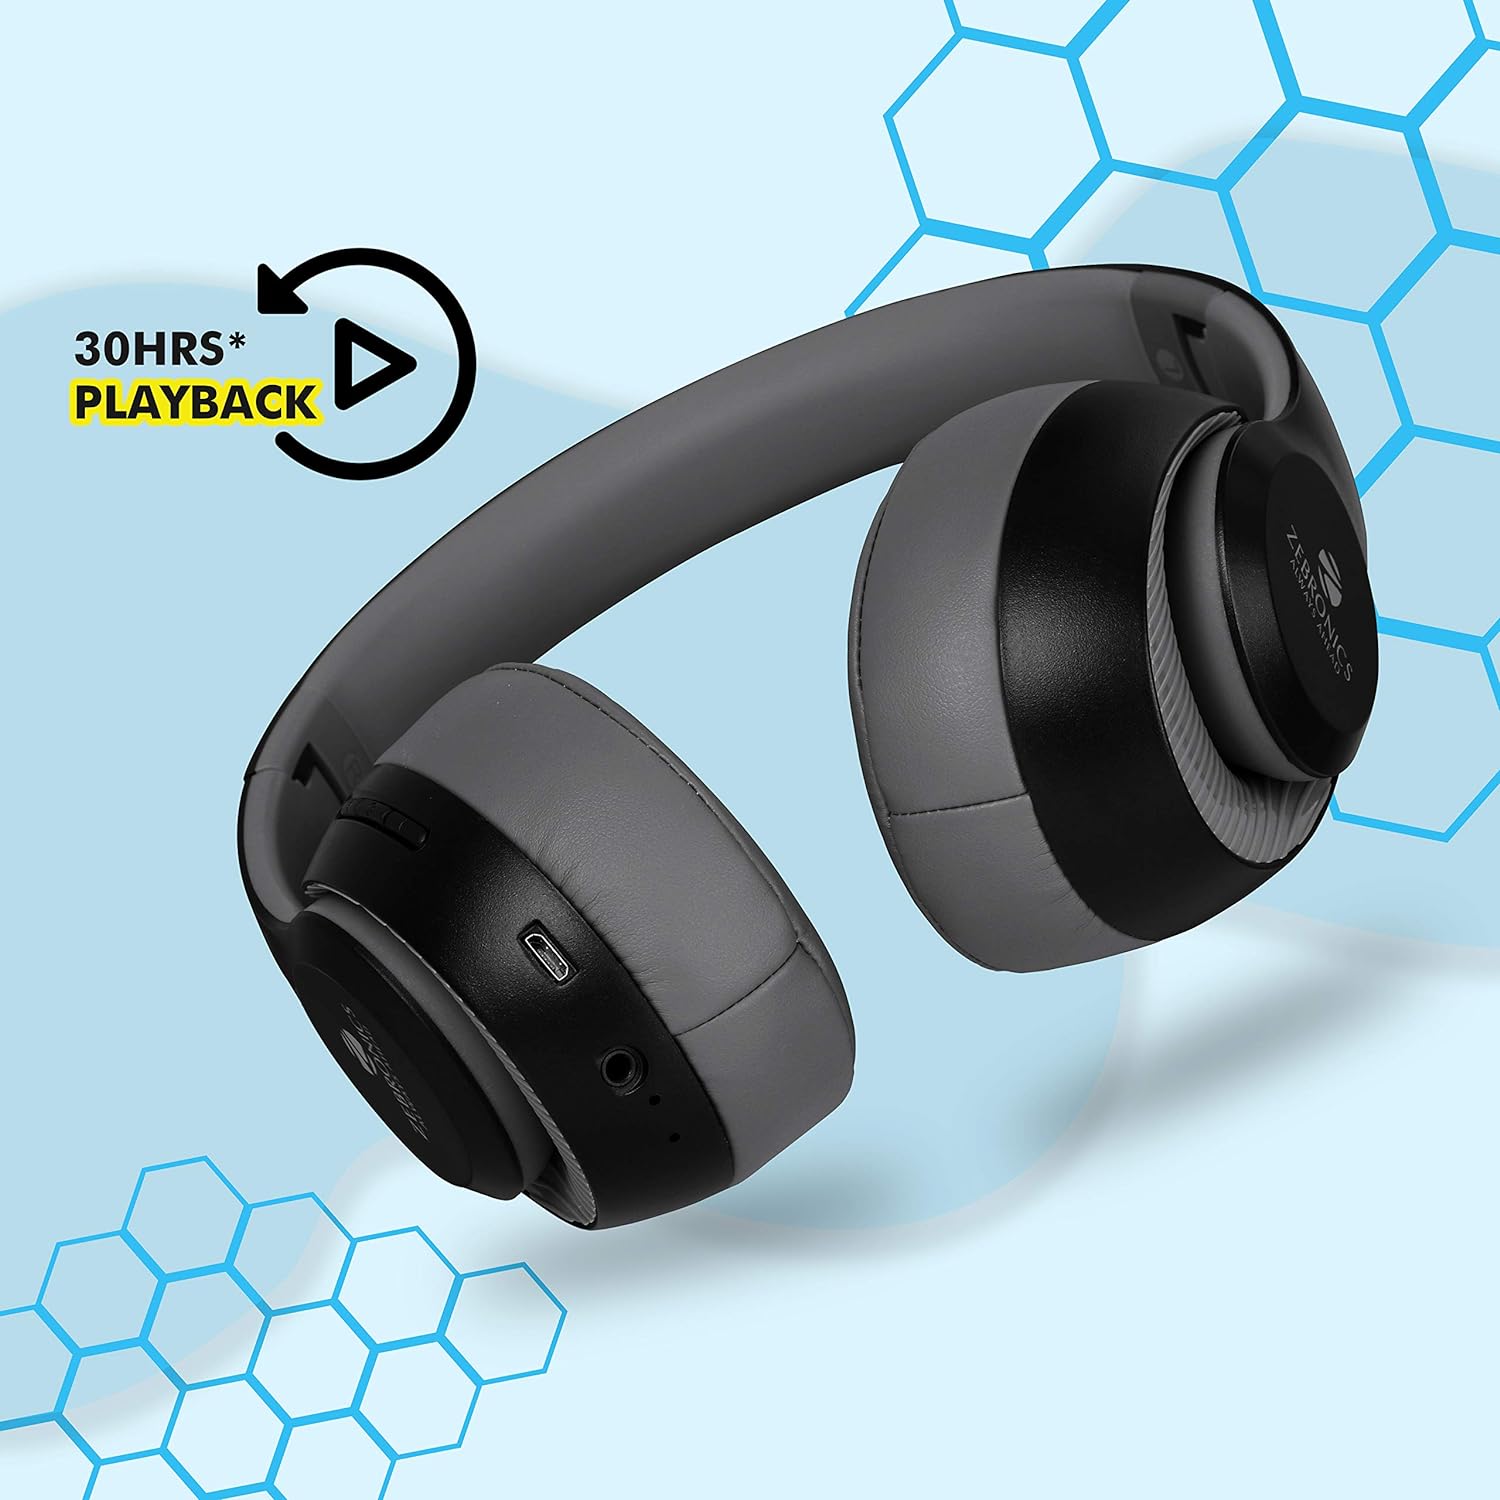 ZEBRONICS Zeb-Dynamic Black with Bluetooth Supporting Headphone, Aux Input, Call Function and Media/Volume Control